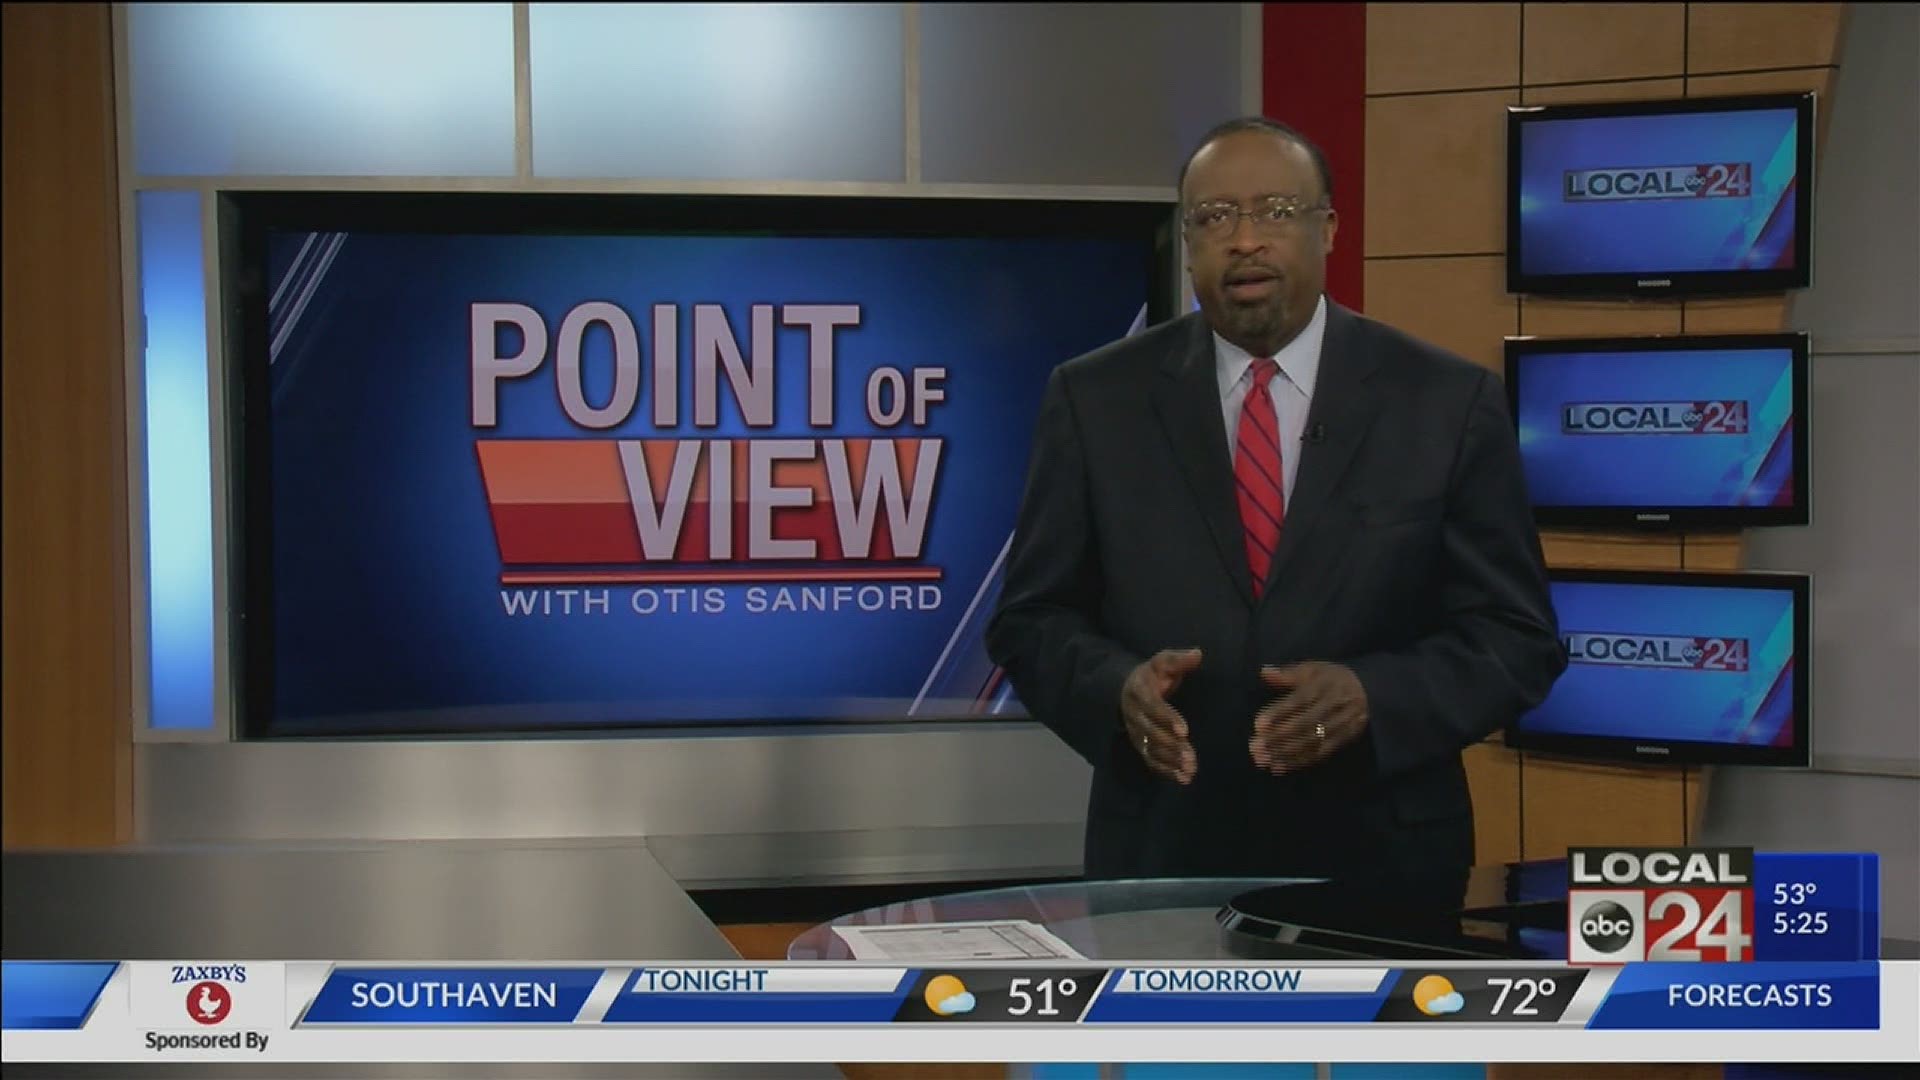 Local 24 News political analyst and commentator Otis Sanford shares his point of view about COVID-19 and those who are vulnerable